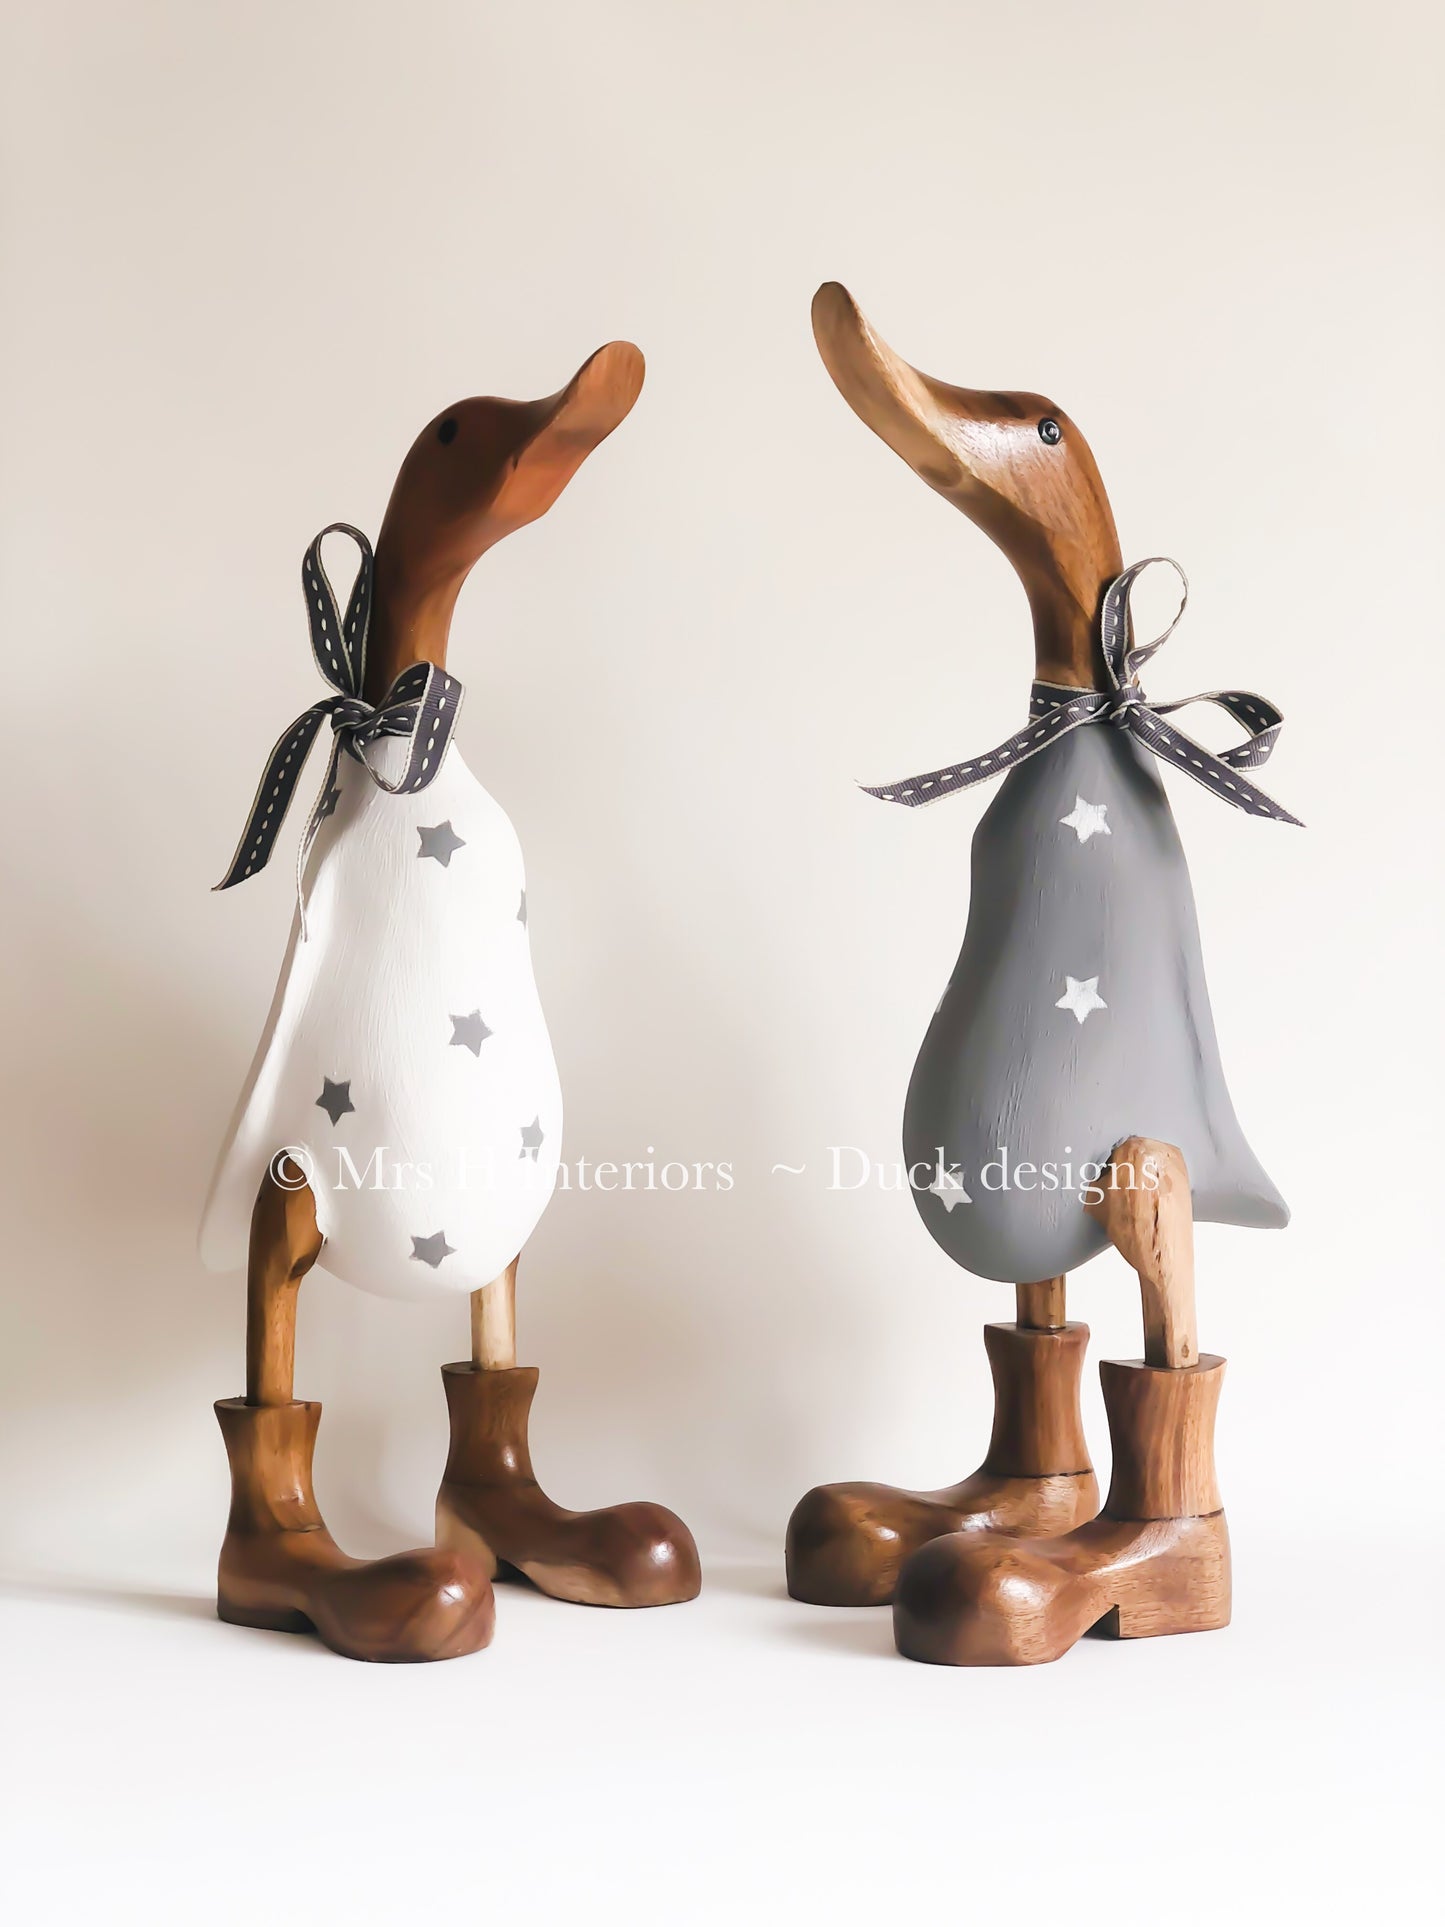 Family of Four Ducks - Personalised Decorated Wooden Ducks in Boots by Mrs H the Duck Lady